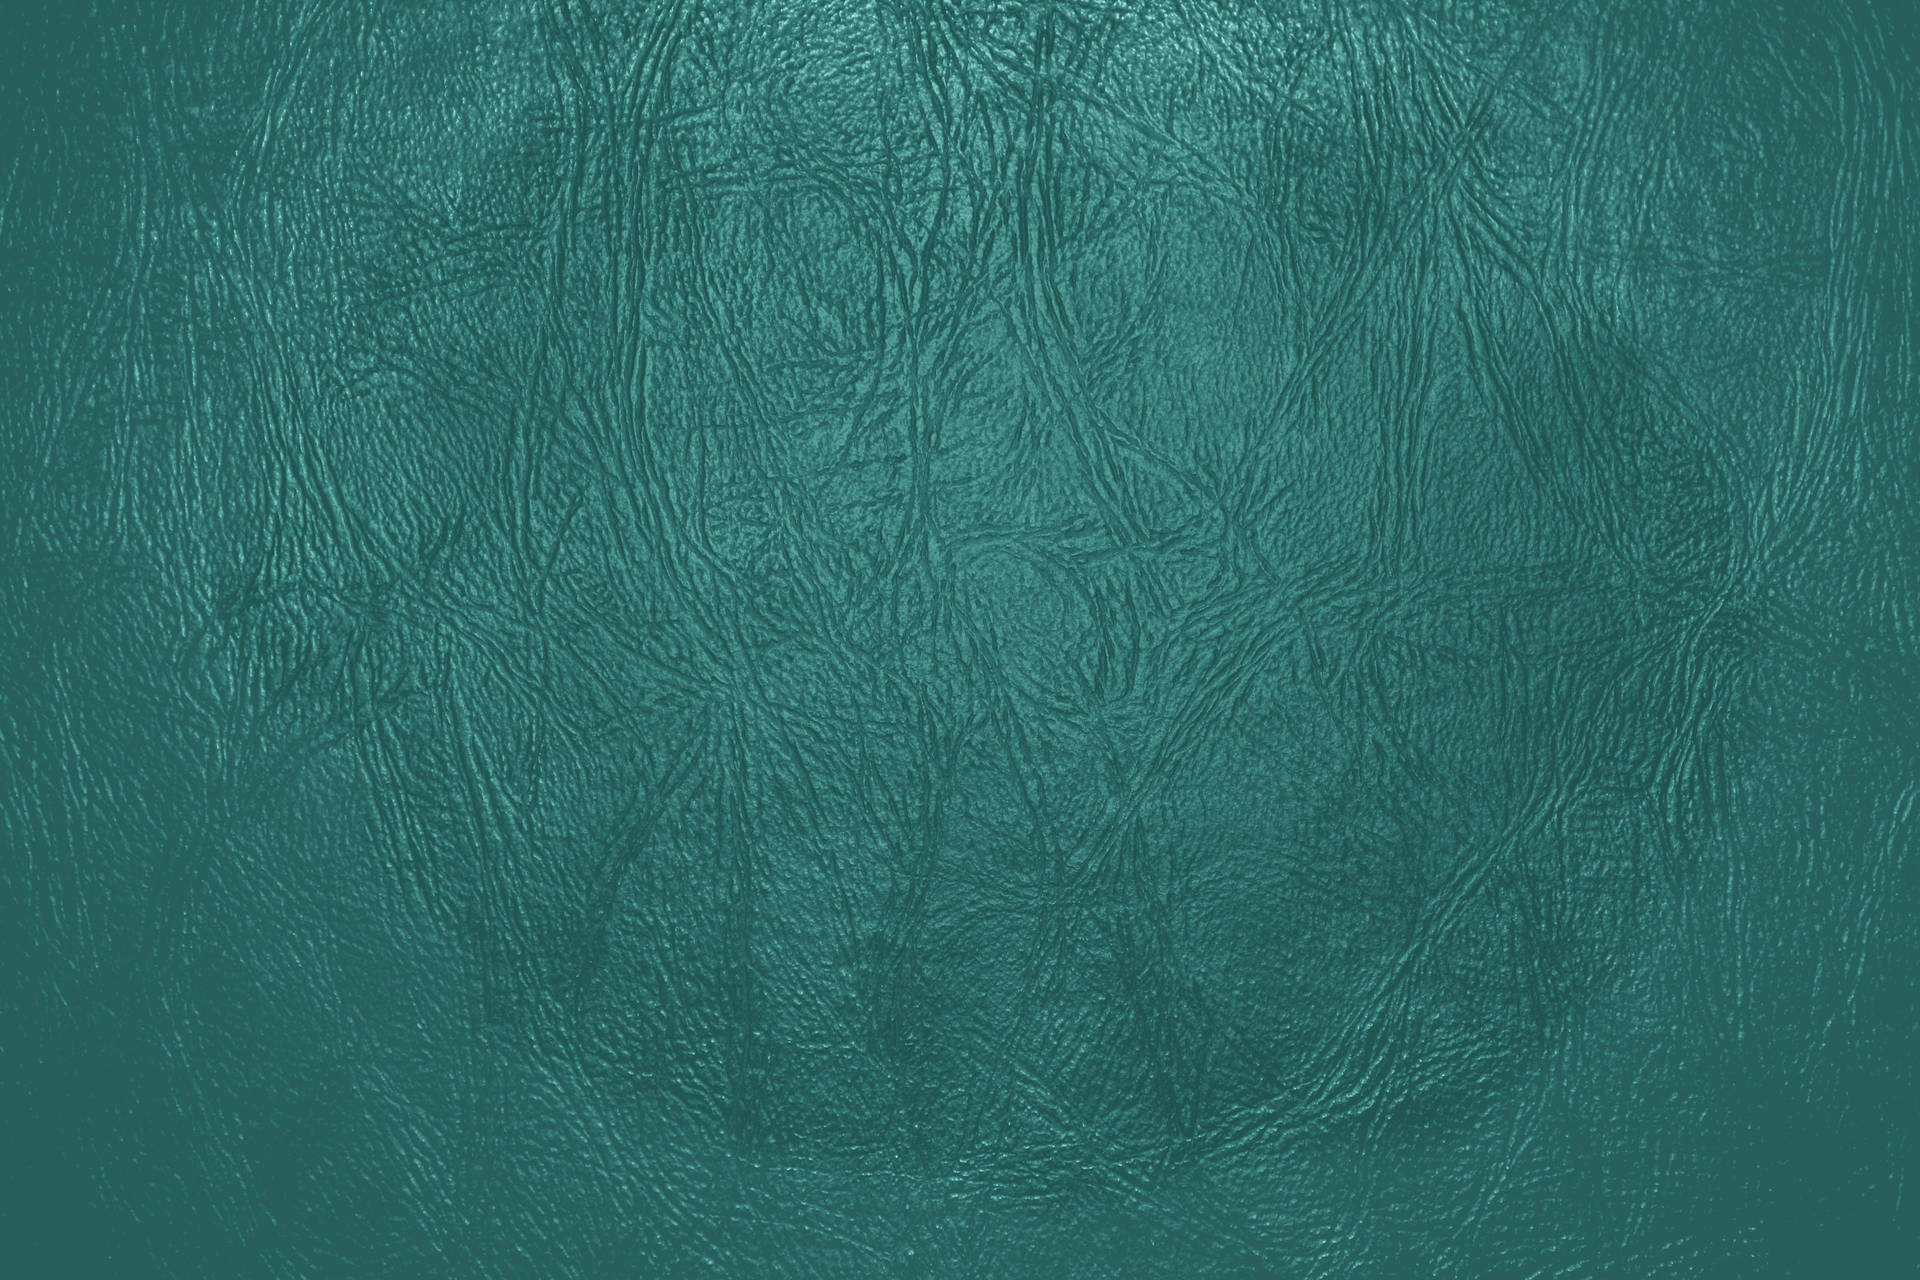 Luxurious Teal Leather Texture Wallpaper